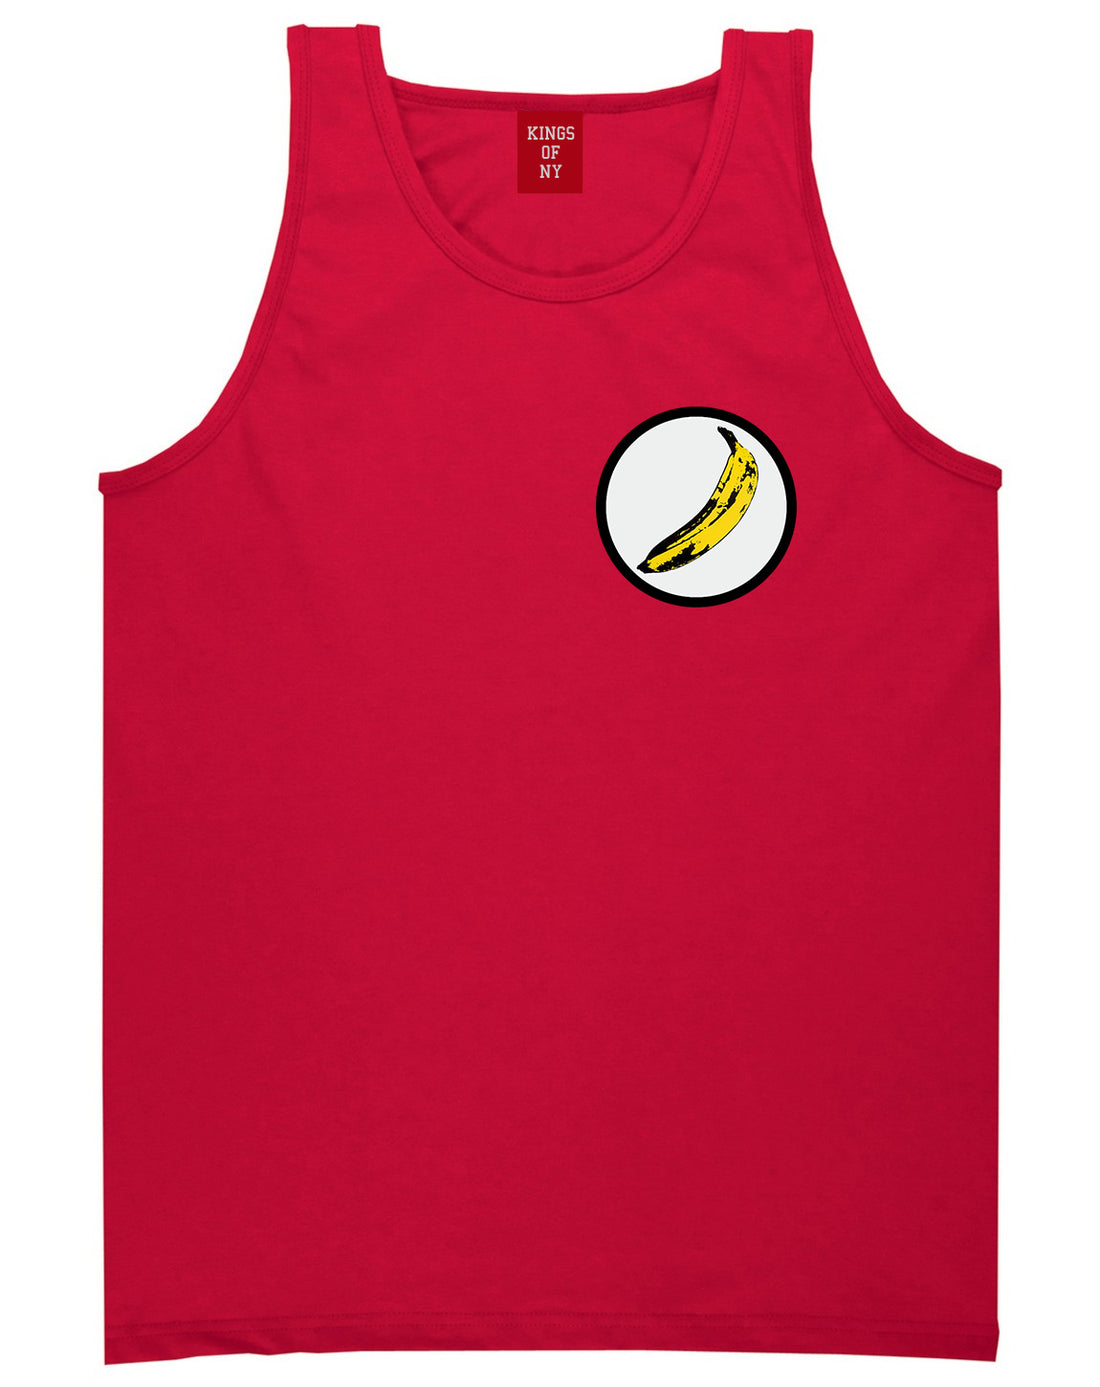 Banana Chest Red Tank Top Shirt by Kings Of NY